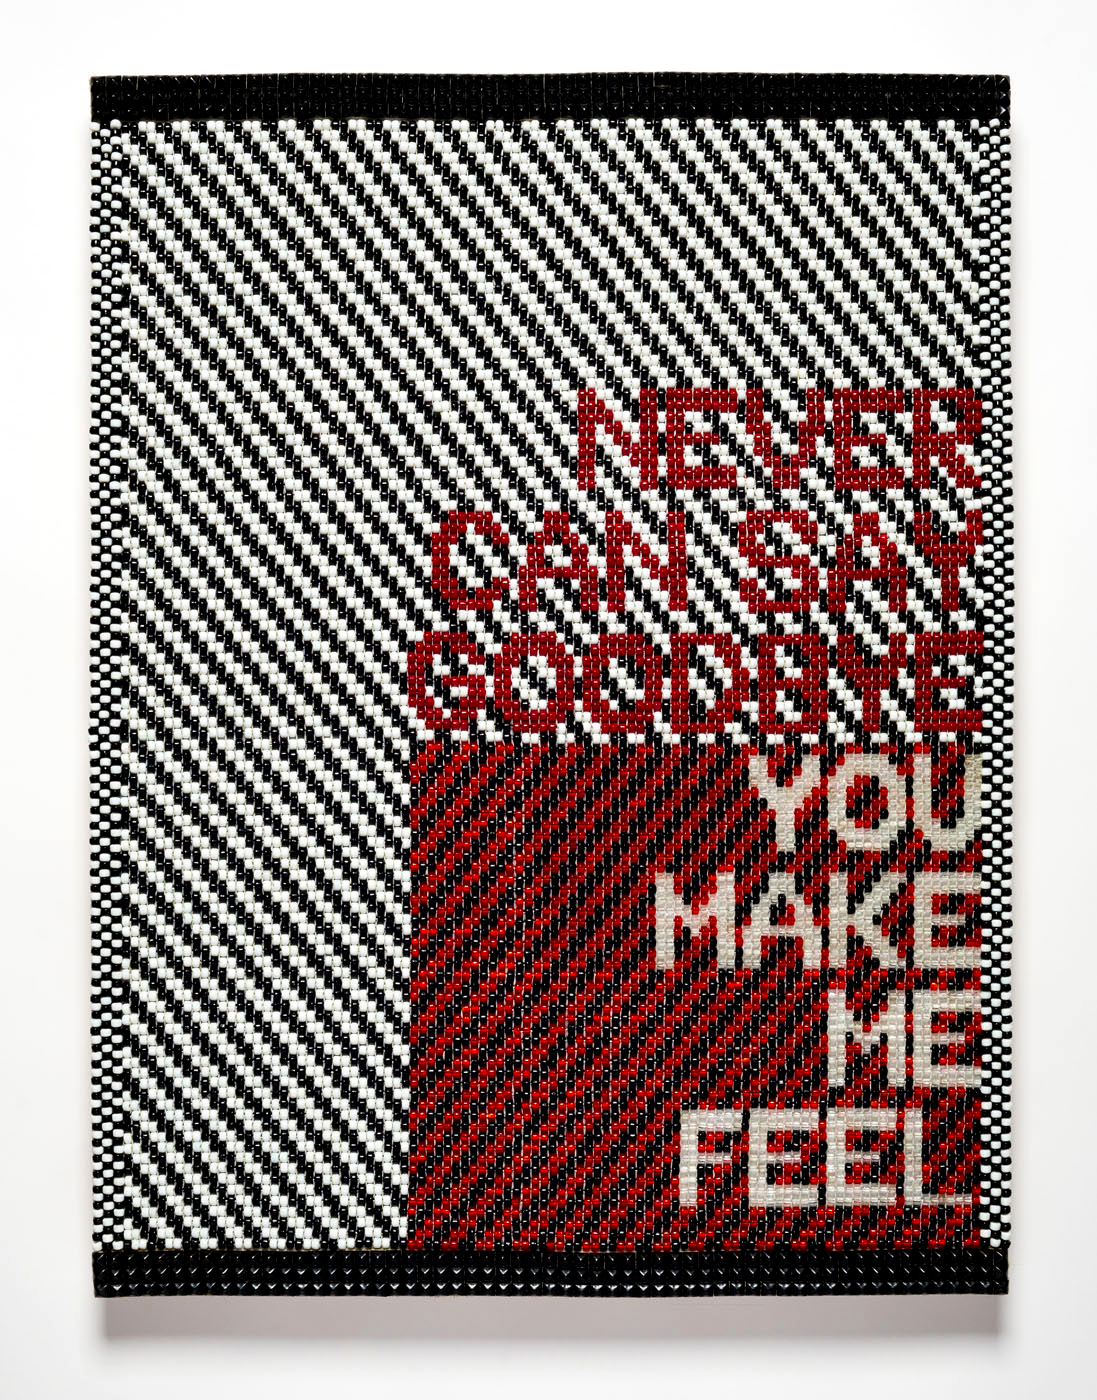 NEVER CAN SAY GOODBYE - YOU MAKE ME FEEL, 2016
Wool, artificial sinew, glass beads, canvas, acrylic medium, wood, steel studs
40 x 30 in (101.6 x 76.2 cm) -  Marc Straus Gallery